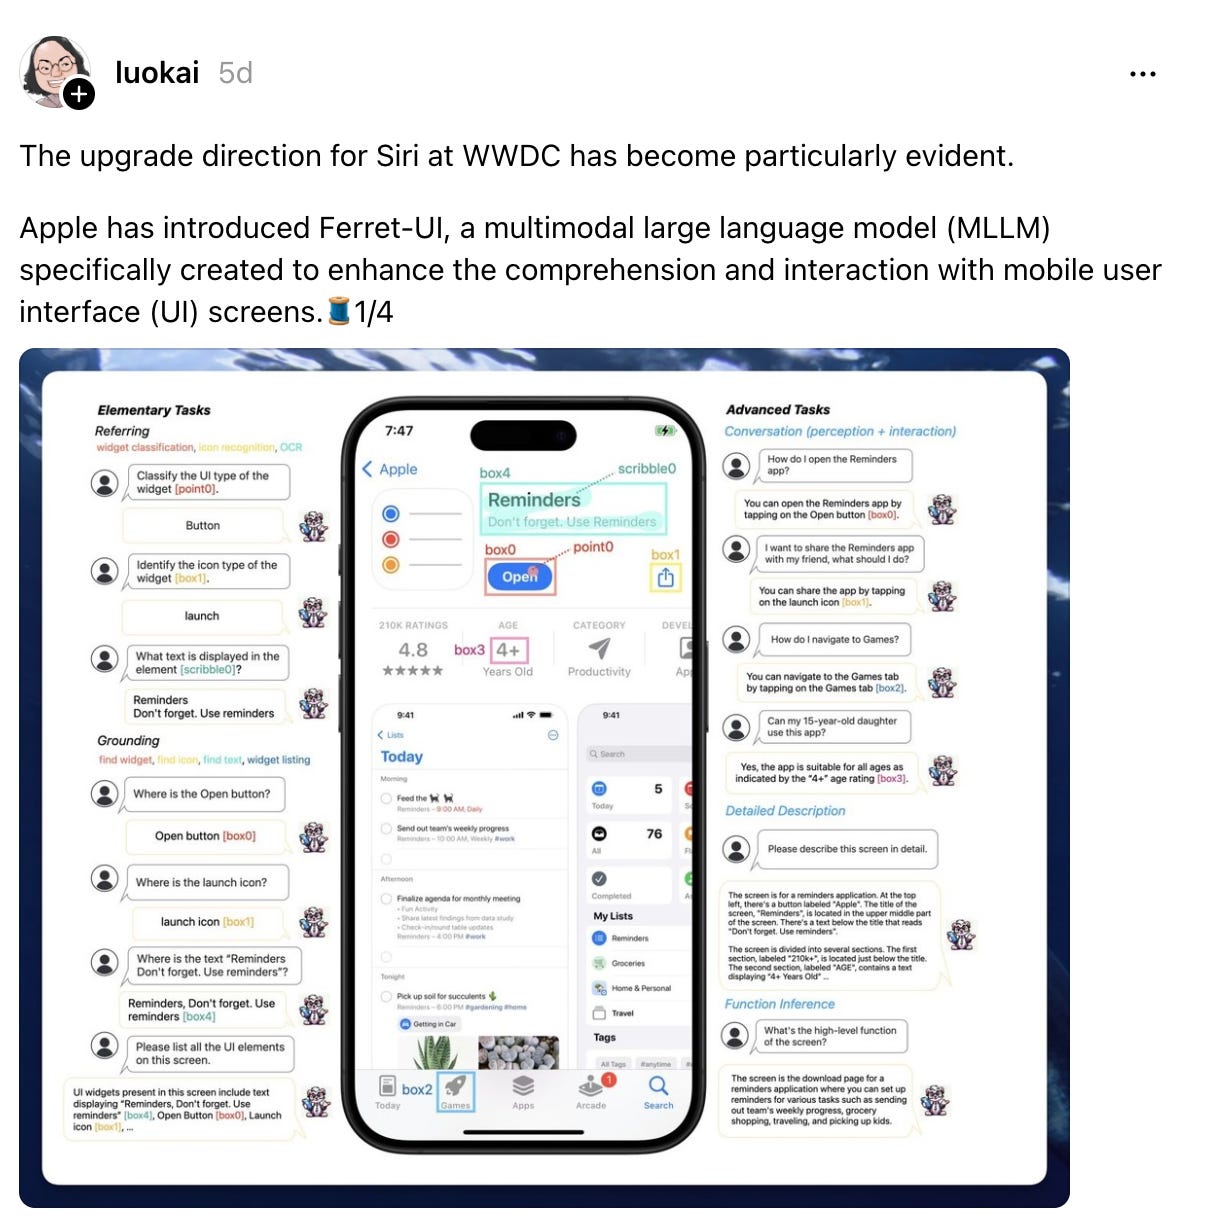  luokai 5d The upgrade direction for Siri at WWDC has become particularly evident. Apple has introduced Ferret-UI, a multimodal large language model (MLLM) specifically created to enhance the comprehension and interaction with mobile user interface (UI) screens.🧵1/4 luokai 12/23/2023